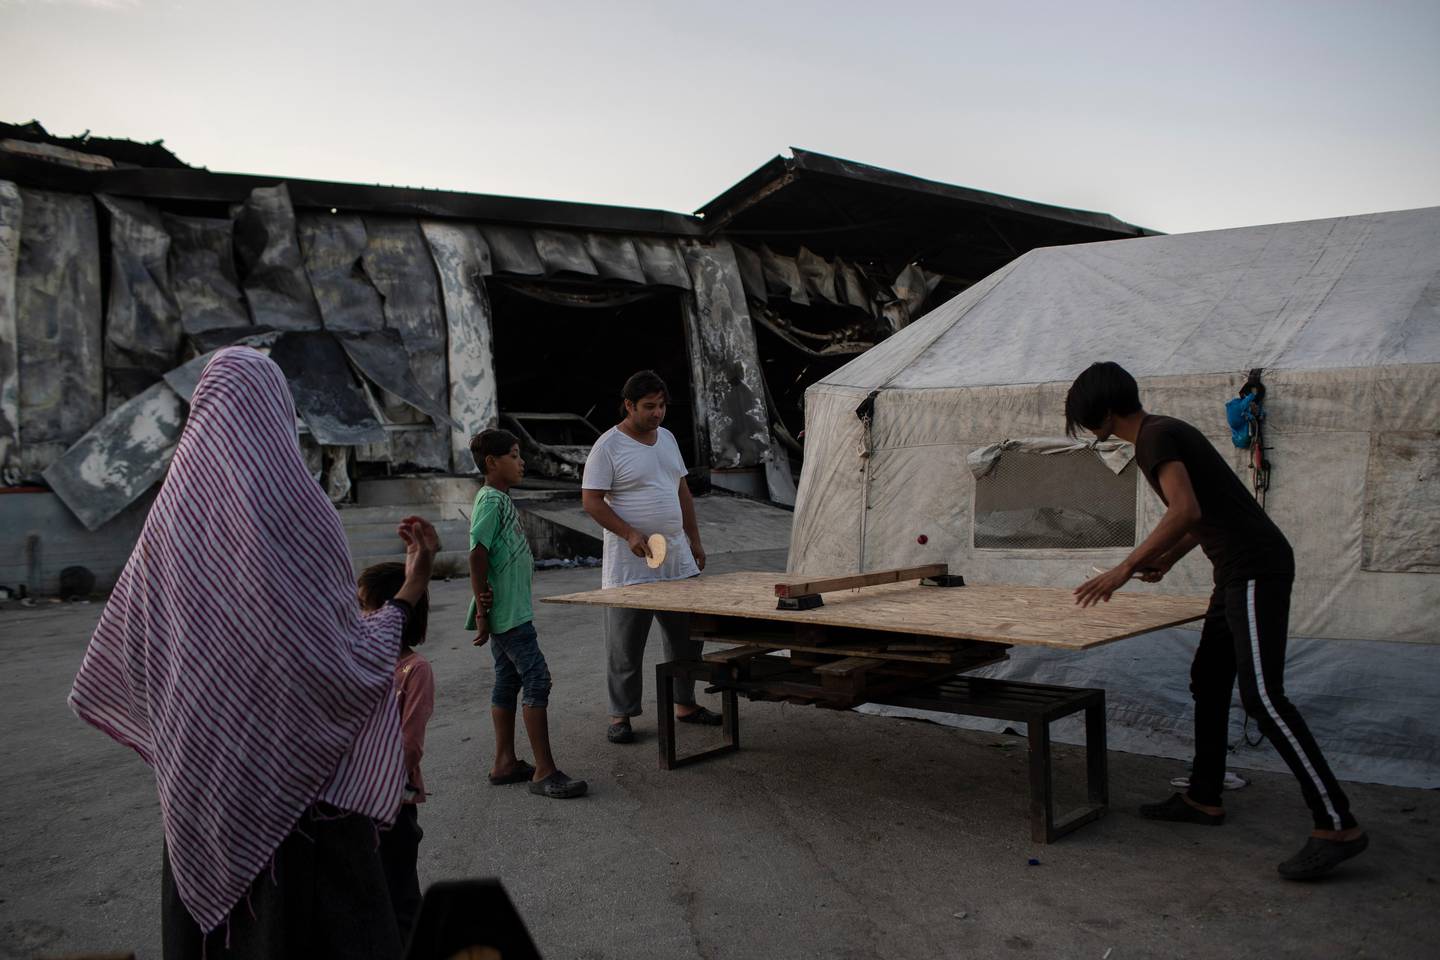 Migrants play table tennis on a makeshift table at the burned Moria refugee camp, on the northeastern island of Lesbos, Greece, Monday, Sept. 14, 2020. Greece's prime minister demanded Sunday that the European Union take a greater responsibility for managing migration into the bloc, as Greek authorities promised that 12,000 migrants and asylum-seekers left homeless after fire gutted an overcrowded camp would be moved shortly to a new tent city. (AP Photo/Petros Giannakouris)